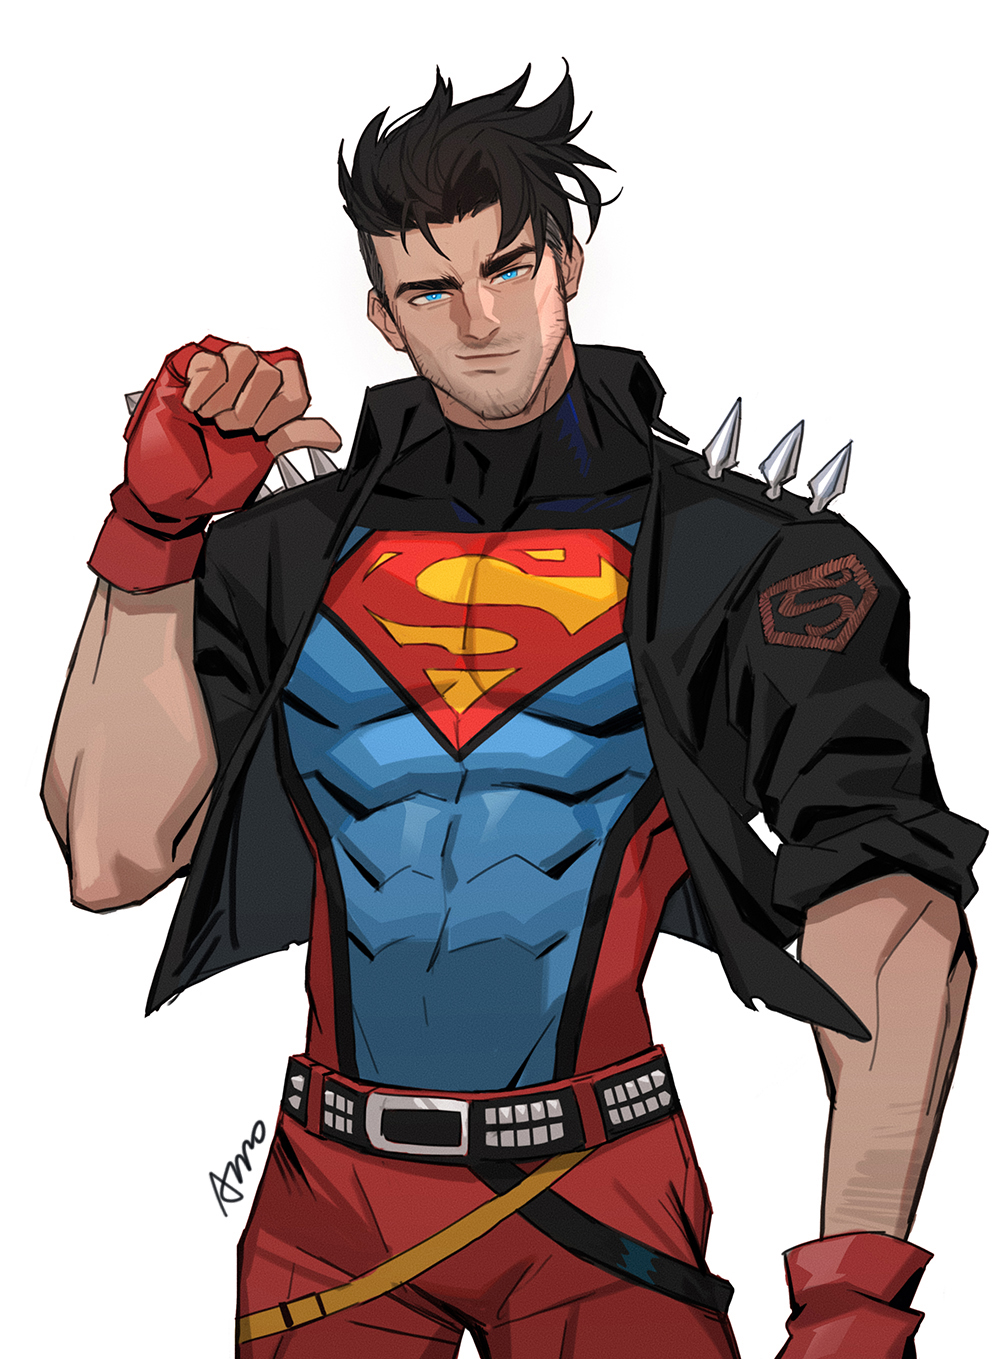 Conner in Young Justice插画图片壁纸